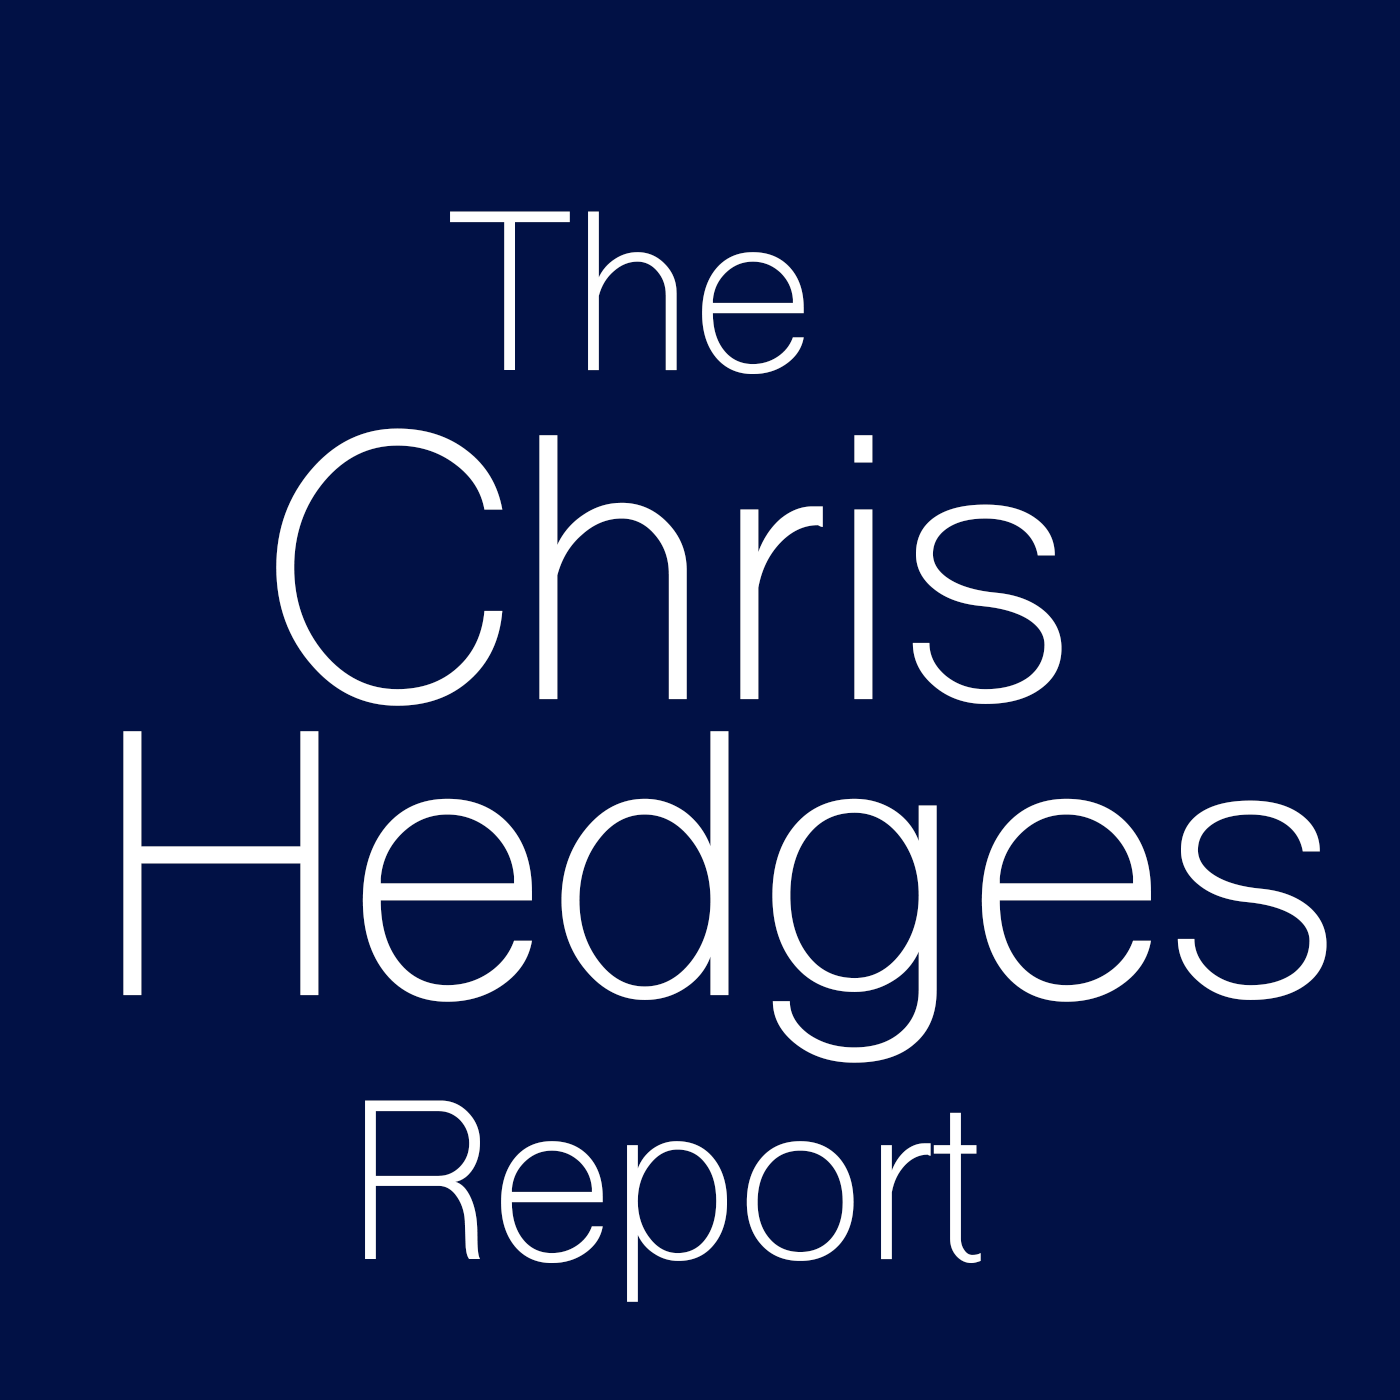 The Chris Hedges Report Podcast with Tony-award winning playwright, author, and activist, V, formerly known as Eve Ensler